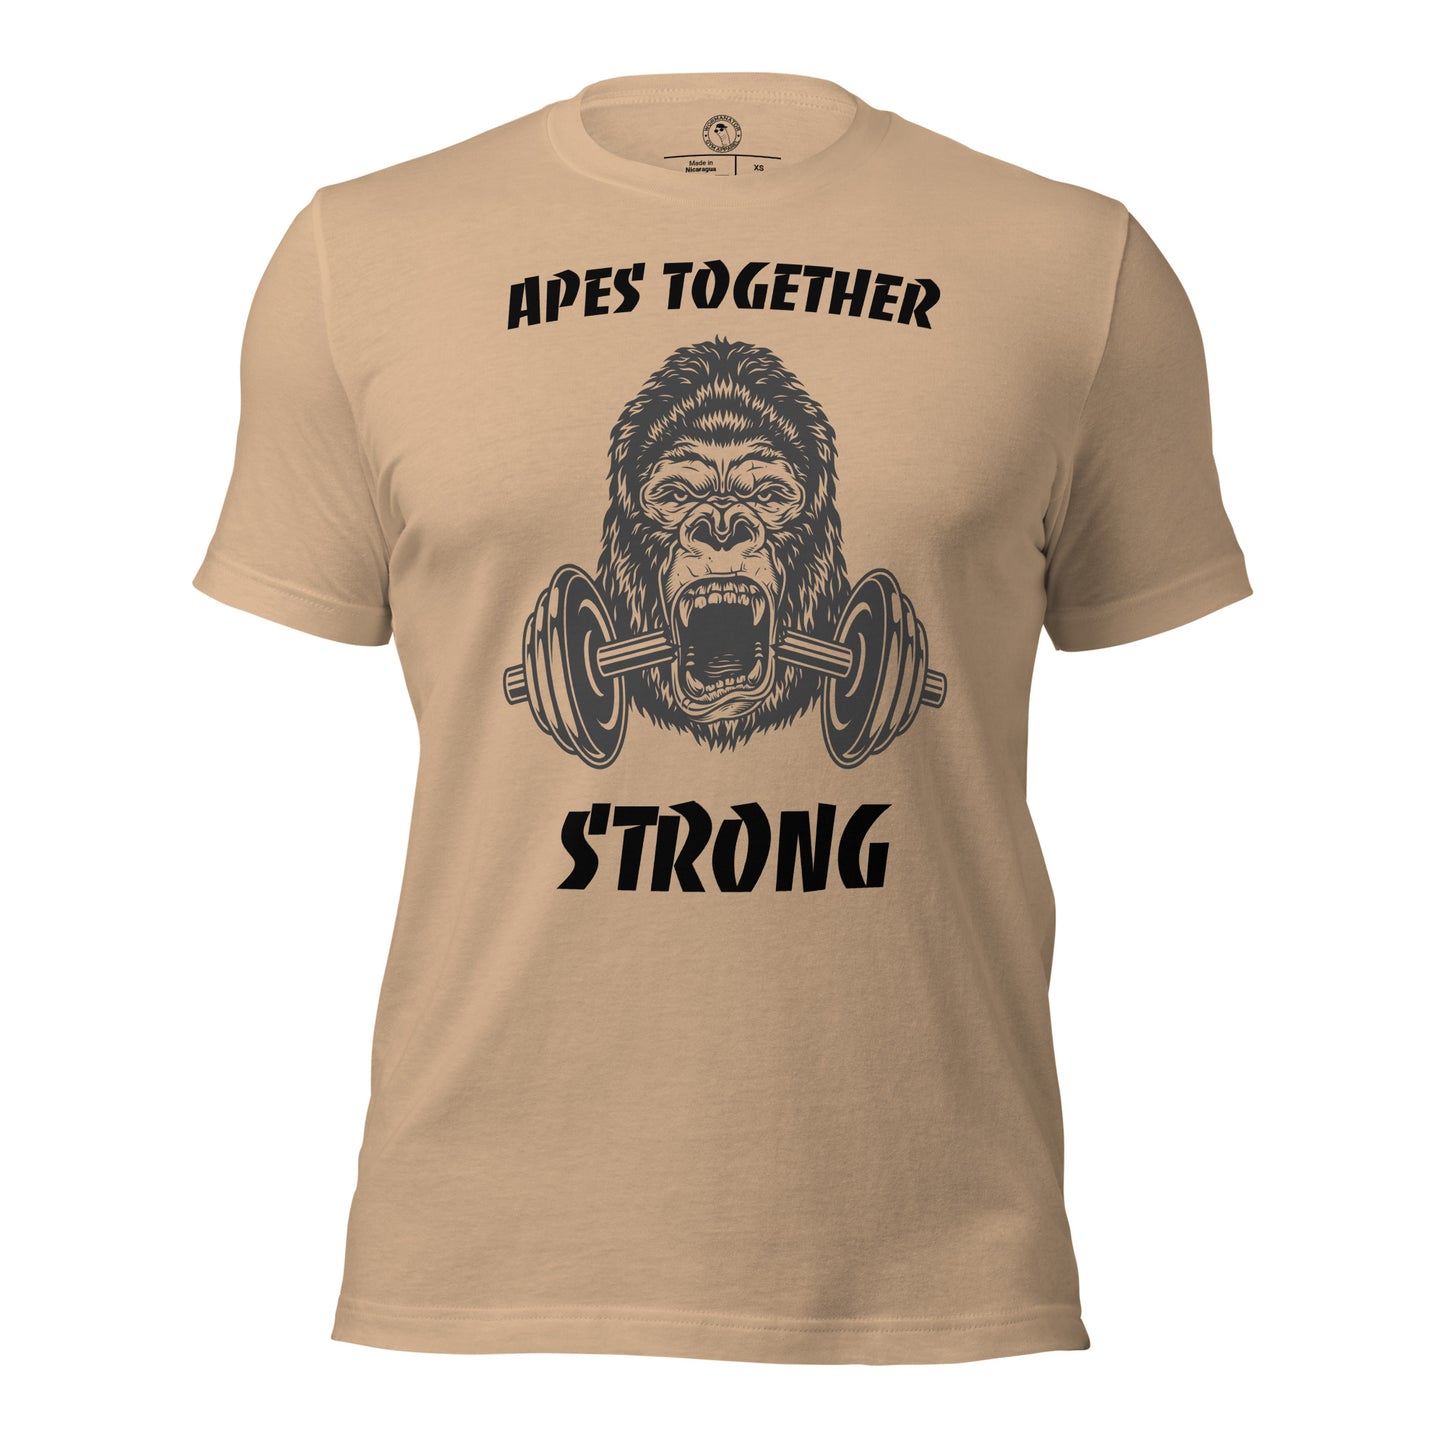 Apes Together Strong Shirt in Tan